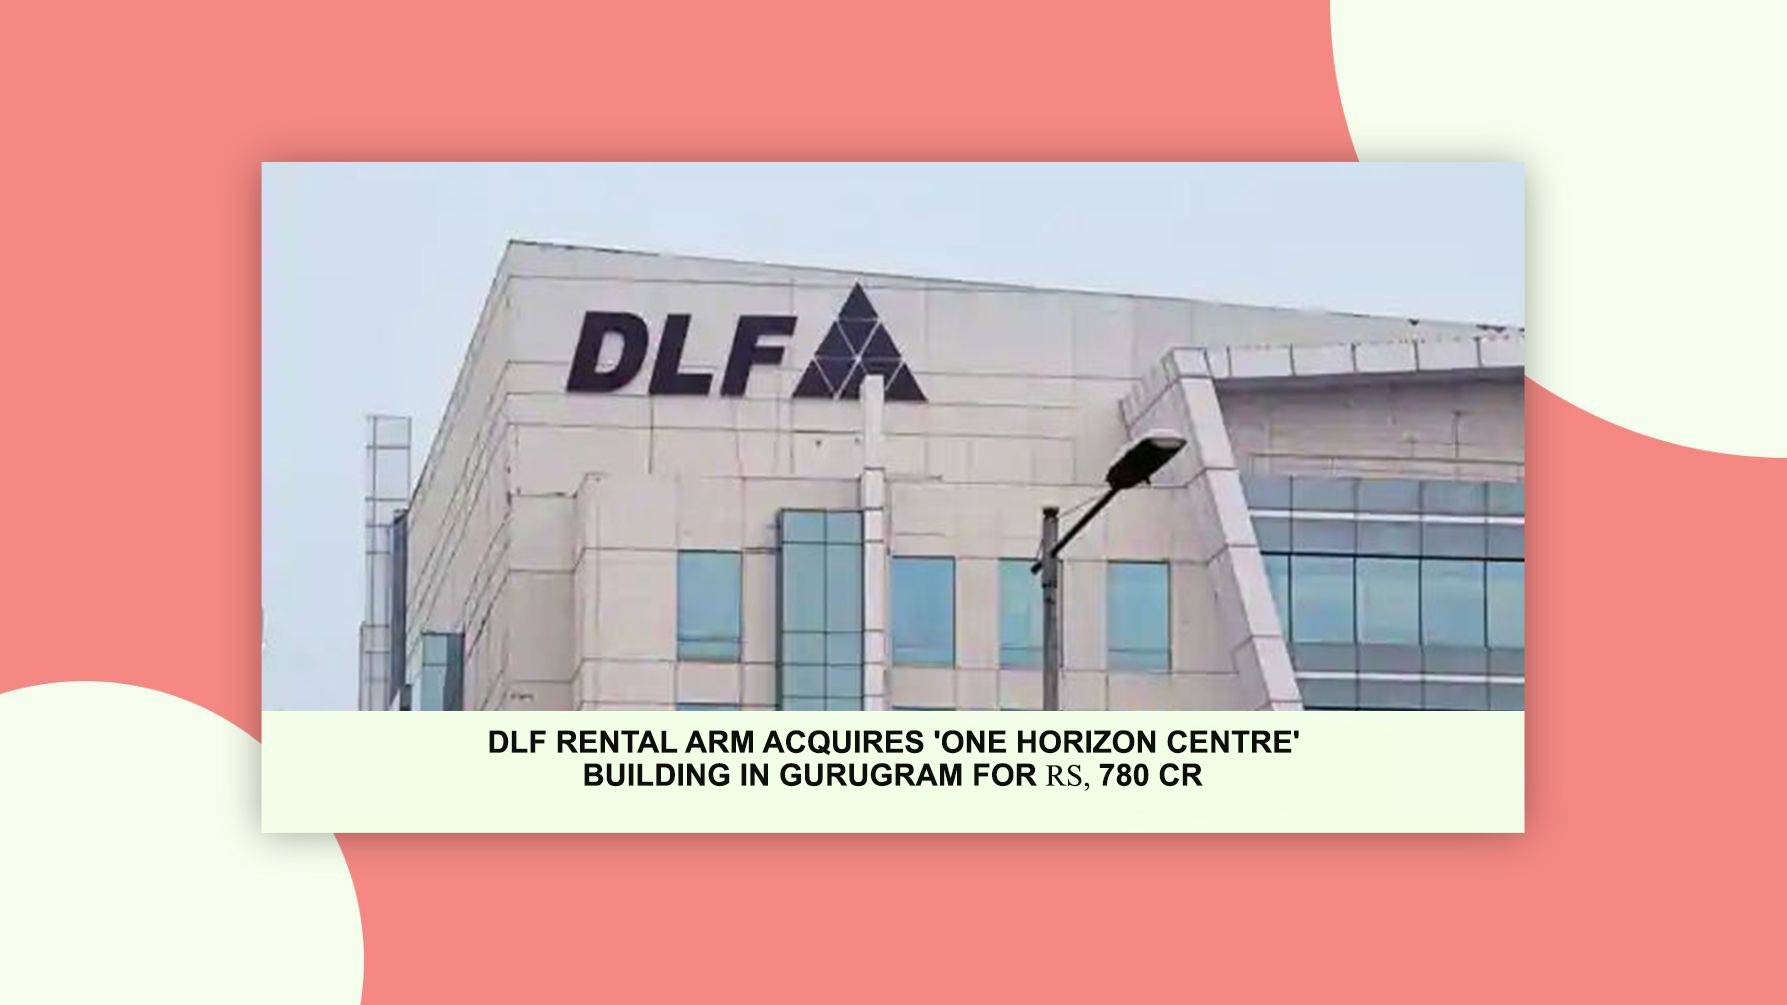 DLF Rental Arm Acquires 'One Horizon Centre' Building in Gurugram for ₹780 cr